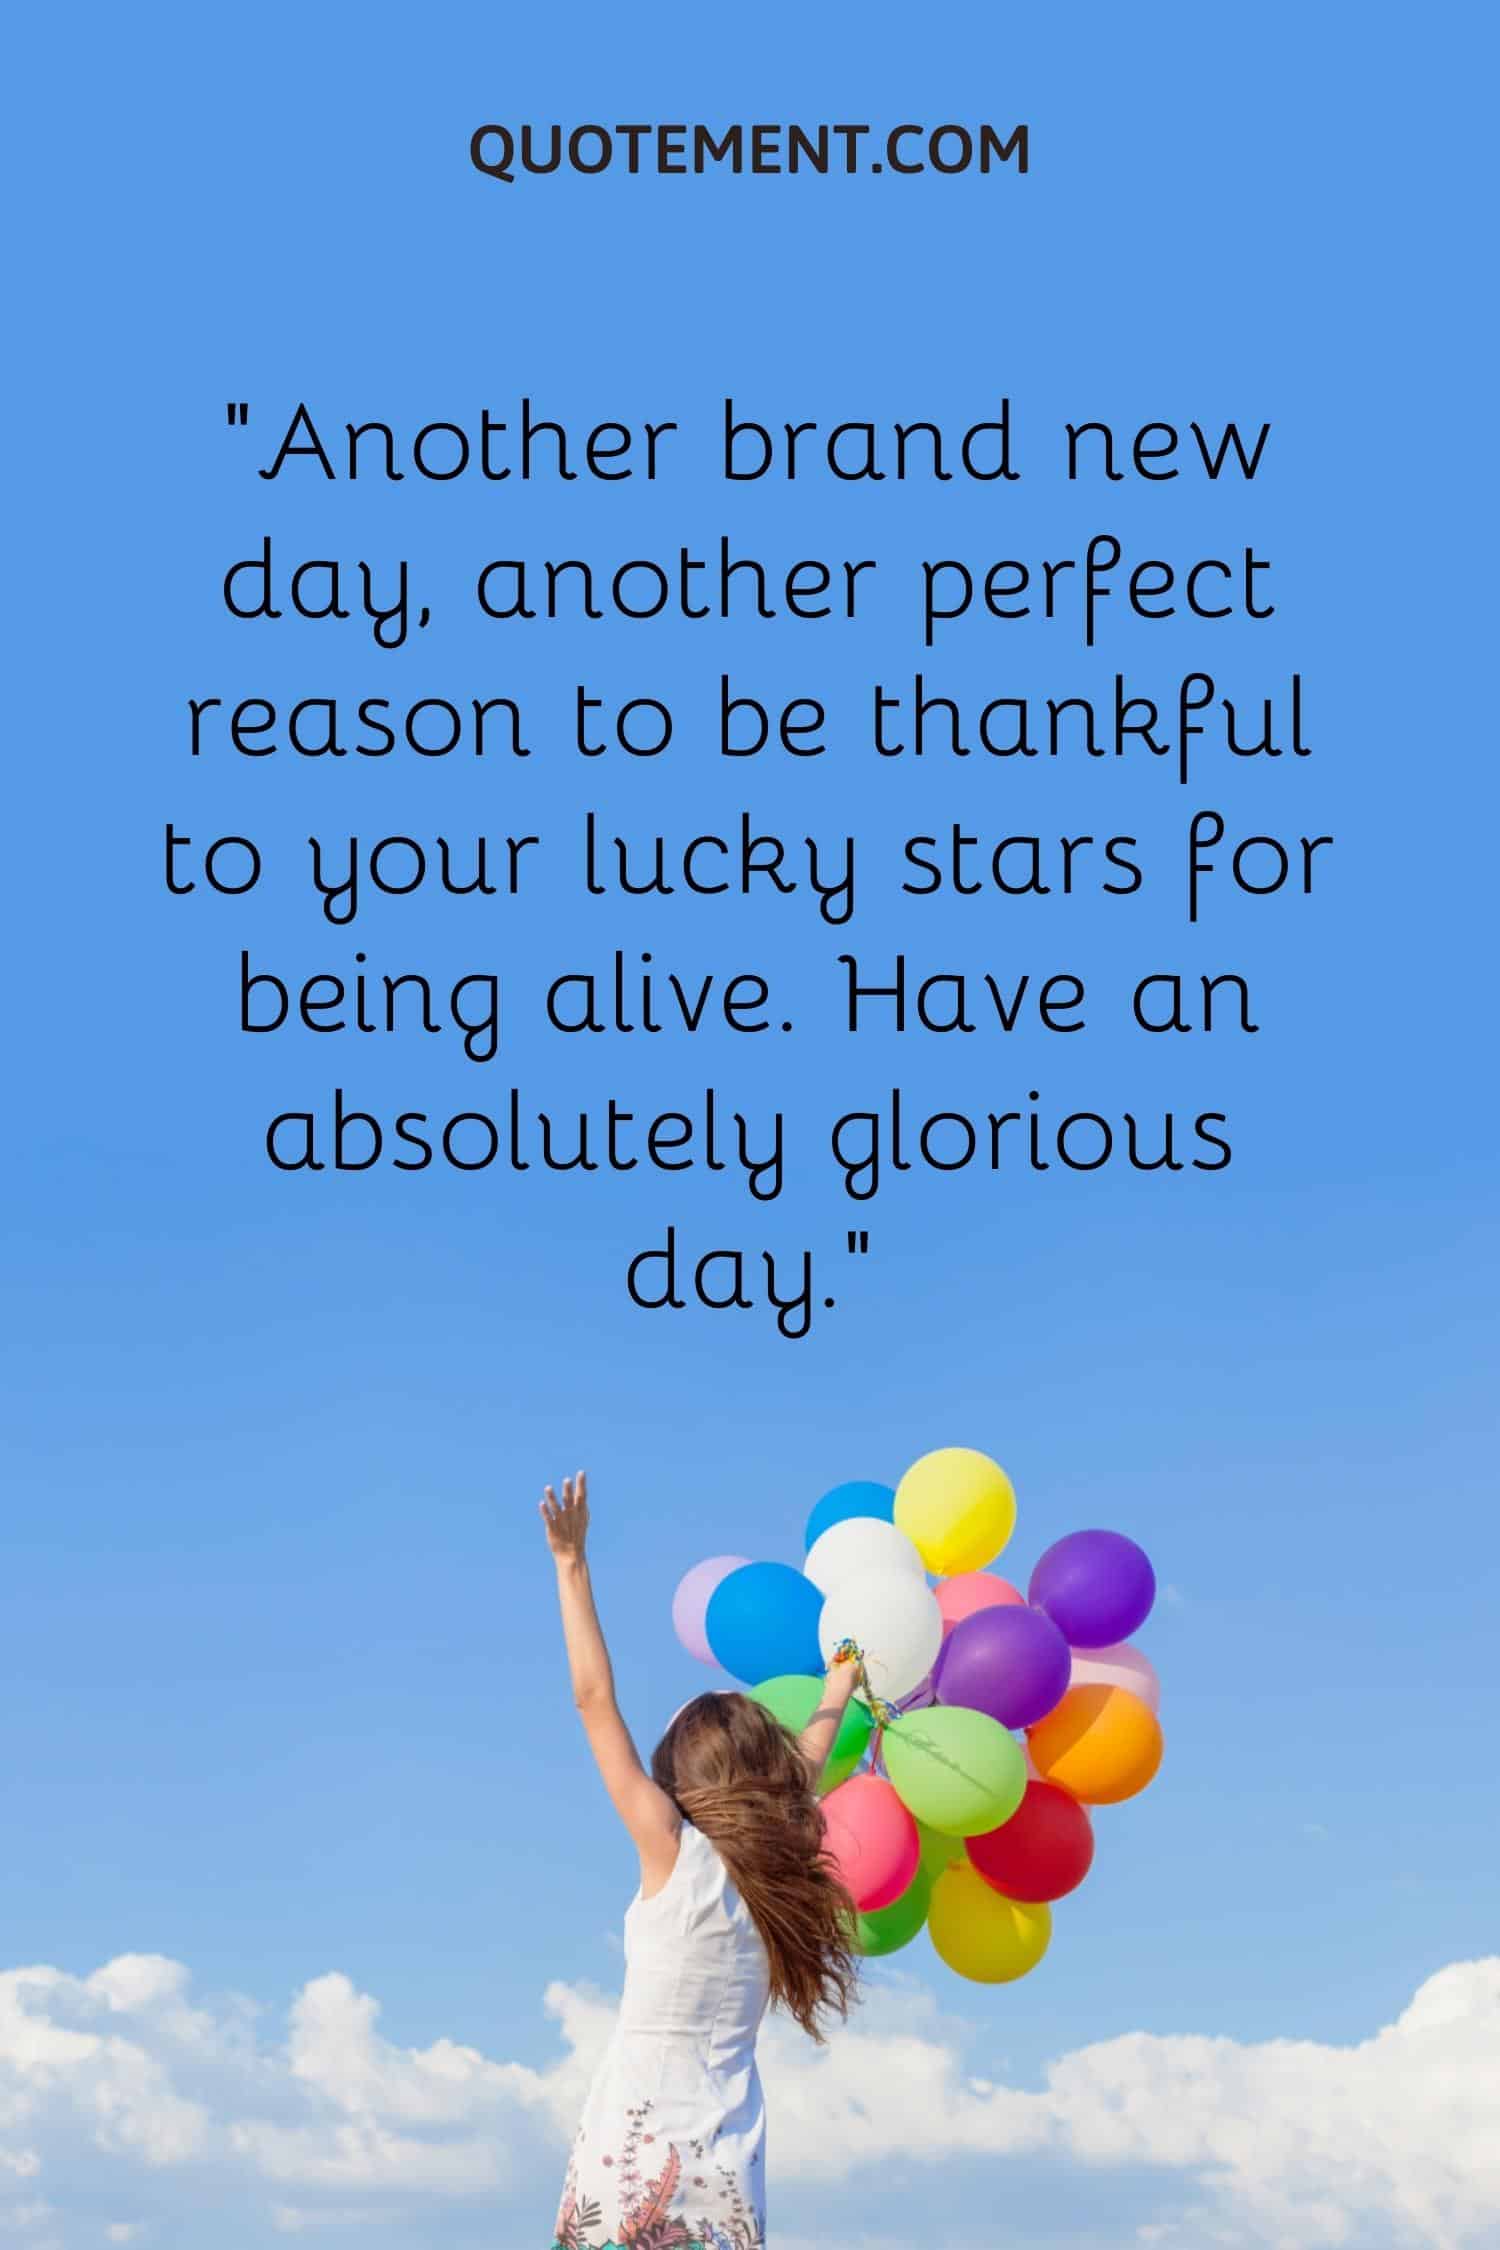 Another brand new day, another perfect reason to be thankful to your lucky stars for being alive